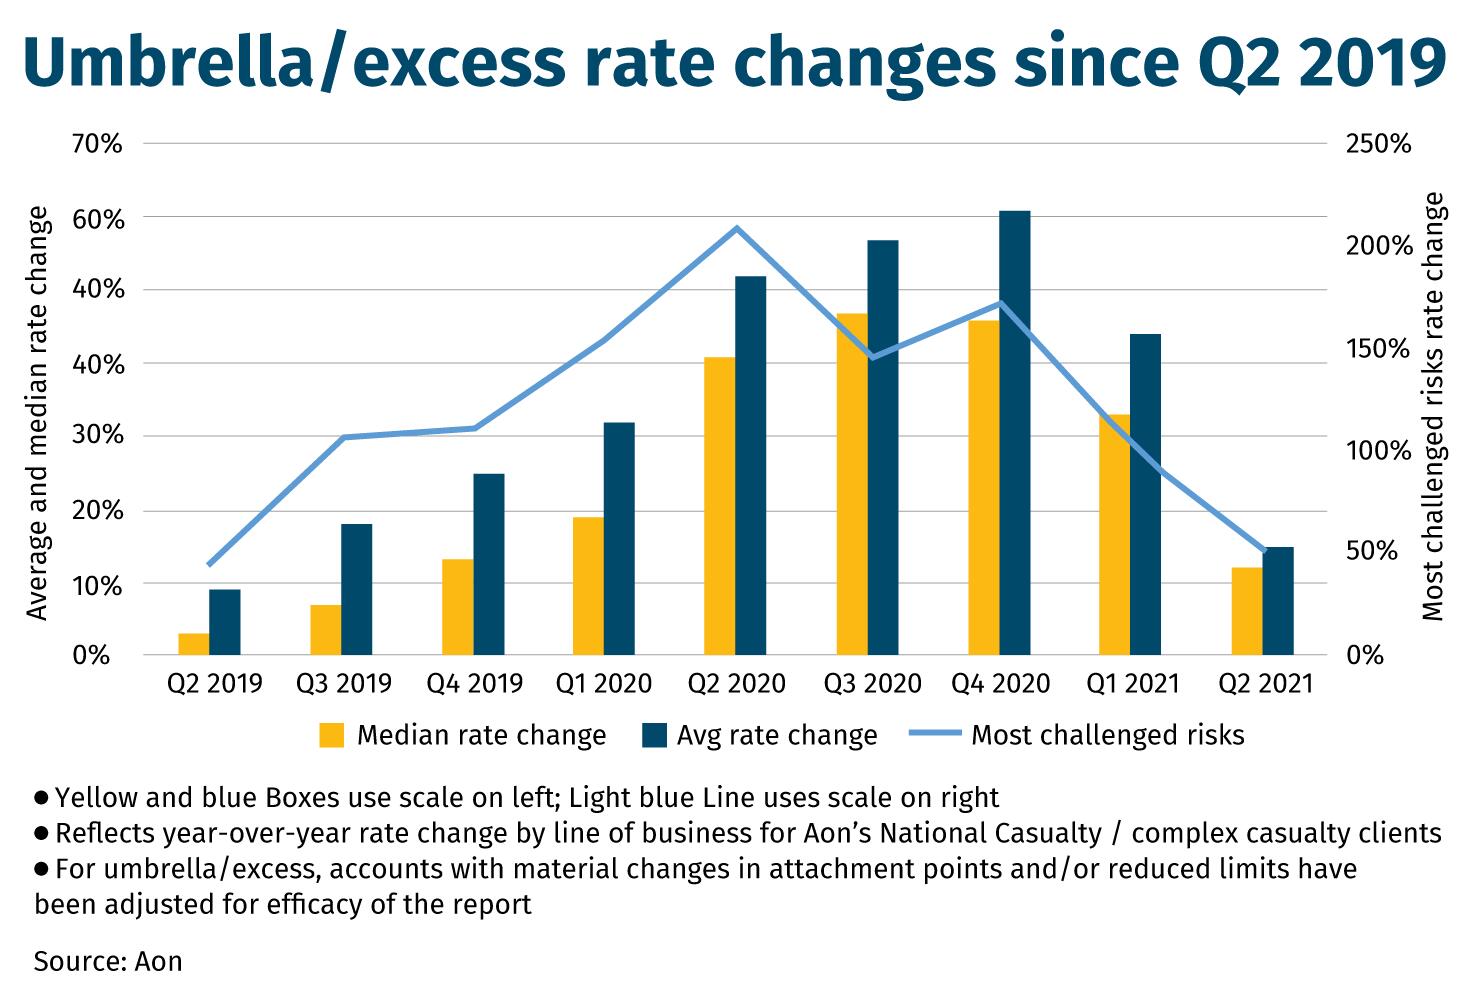 Umbrella excess rate changes since Q2 2019